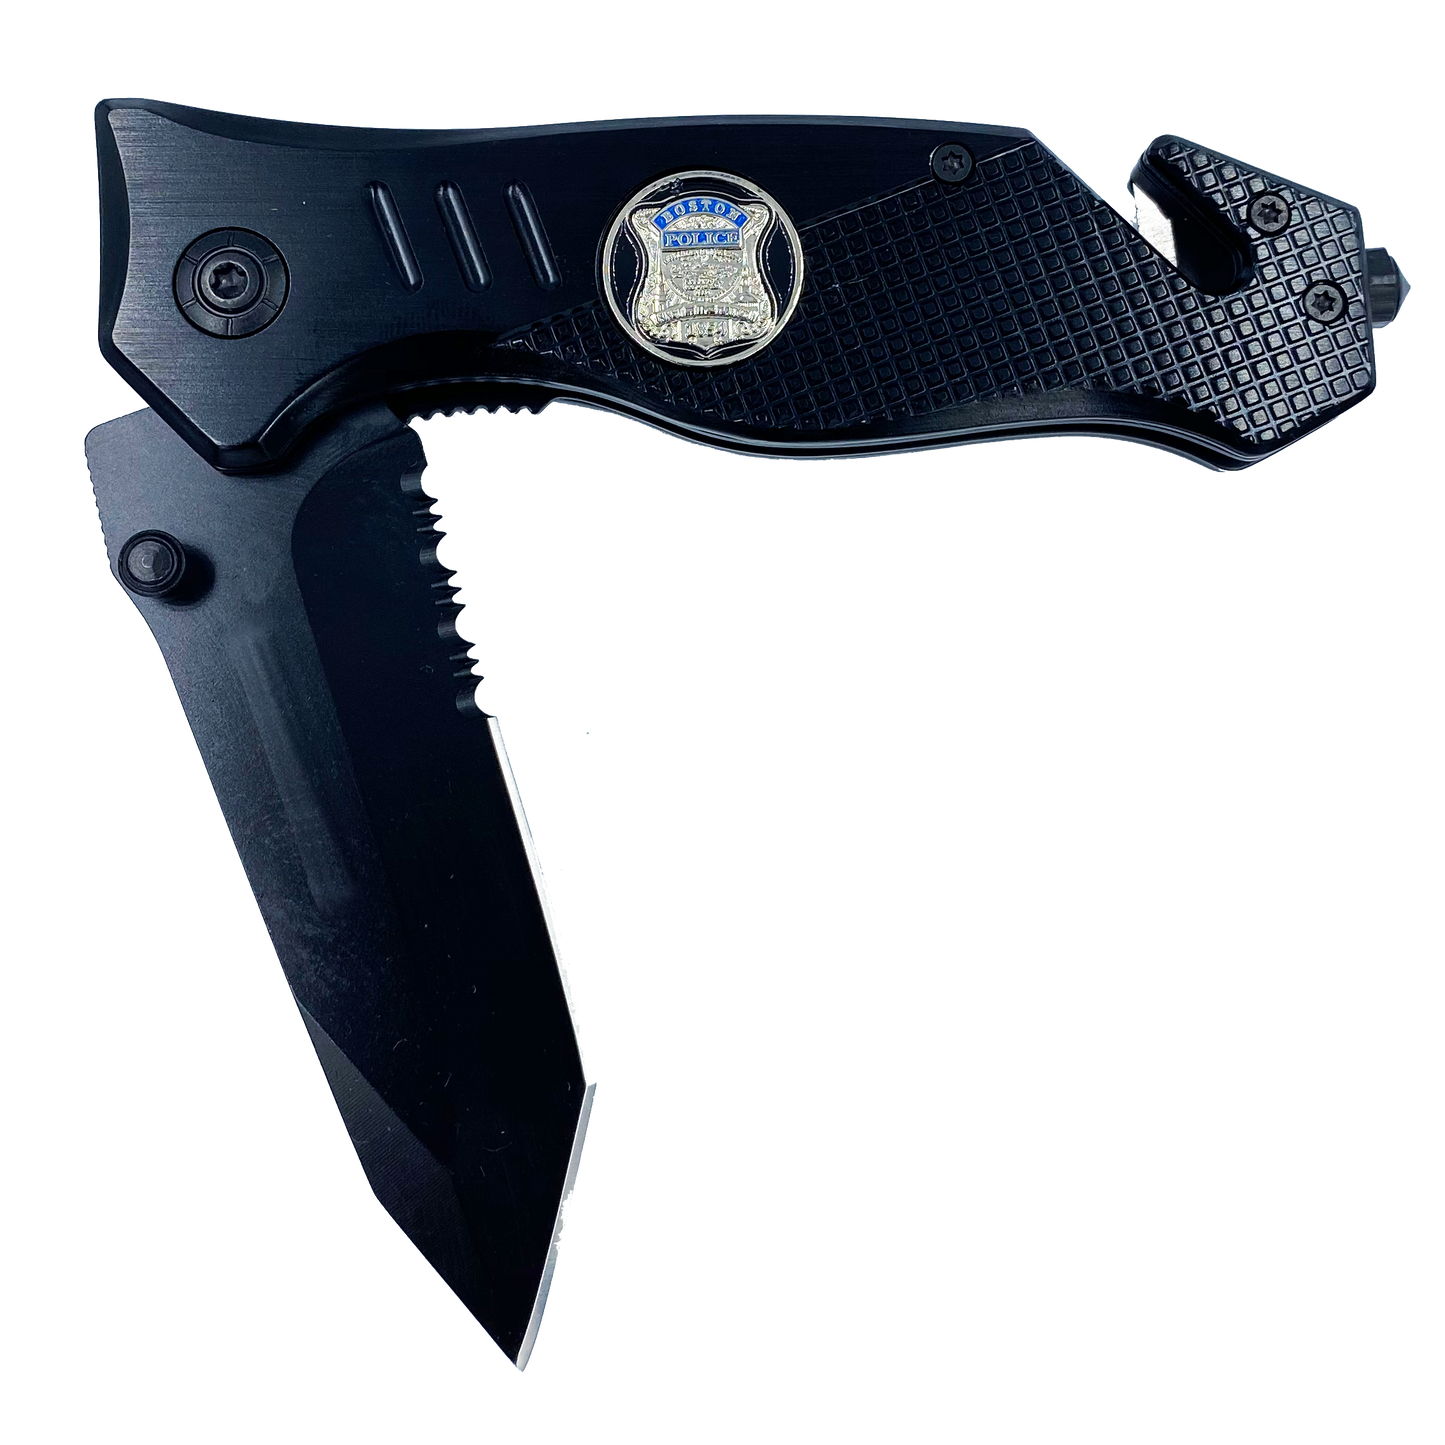 Boston Police collectible Officer 3-in-1 Police Tactical Rescue knife tool with Seatbelt Cutter, Steel Serrated Blade, Glass Breaker BPD